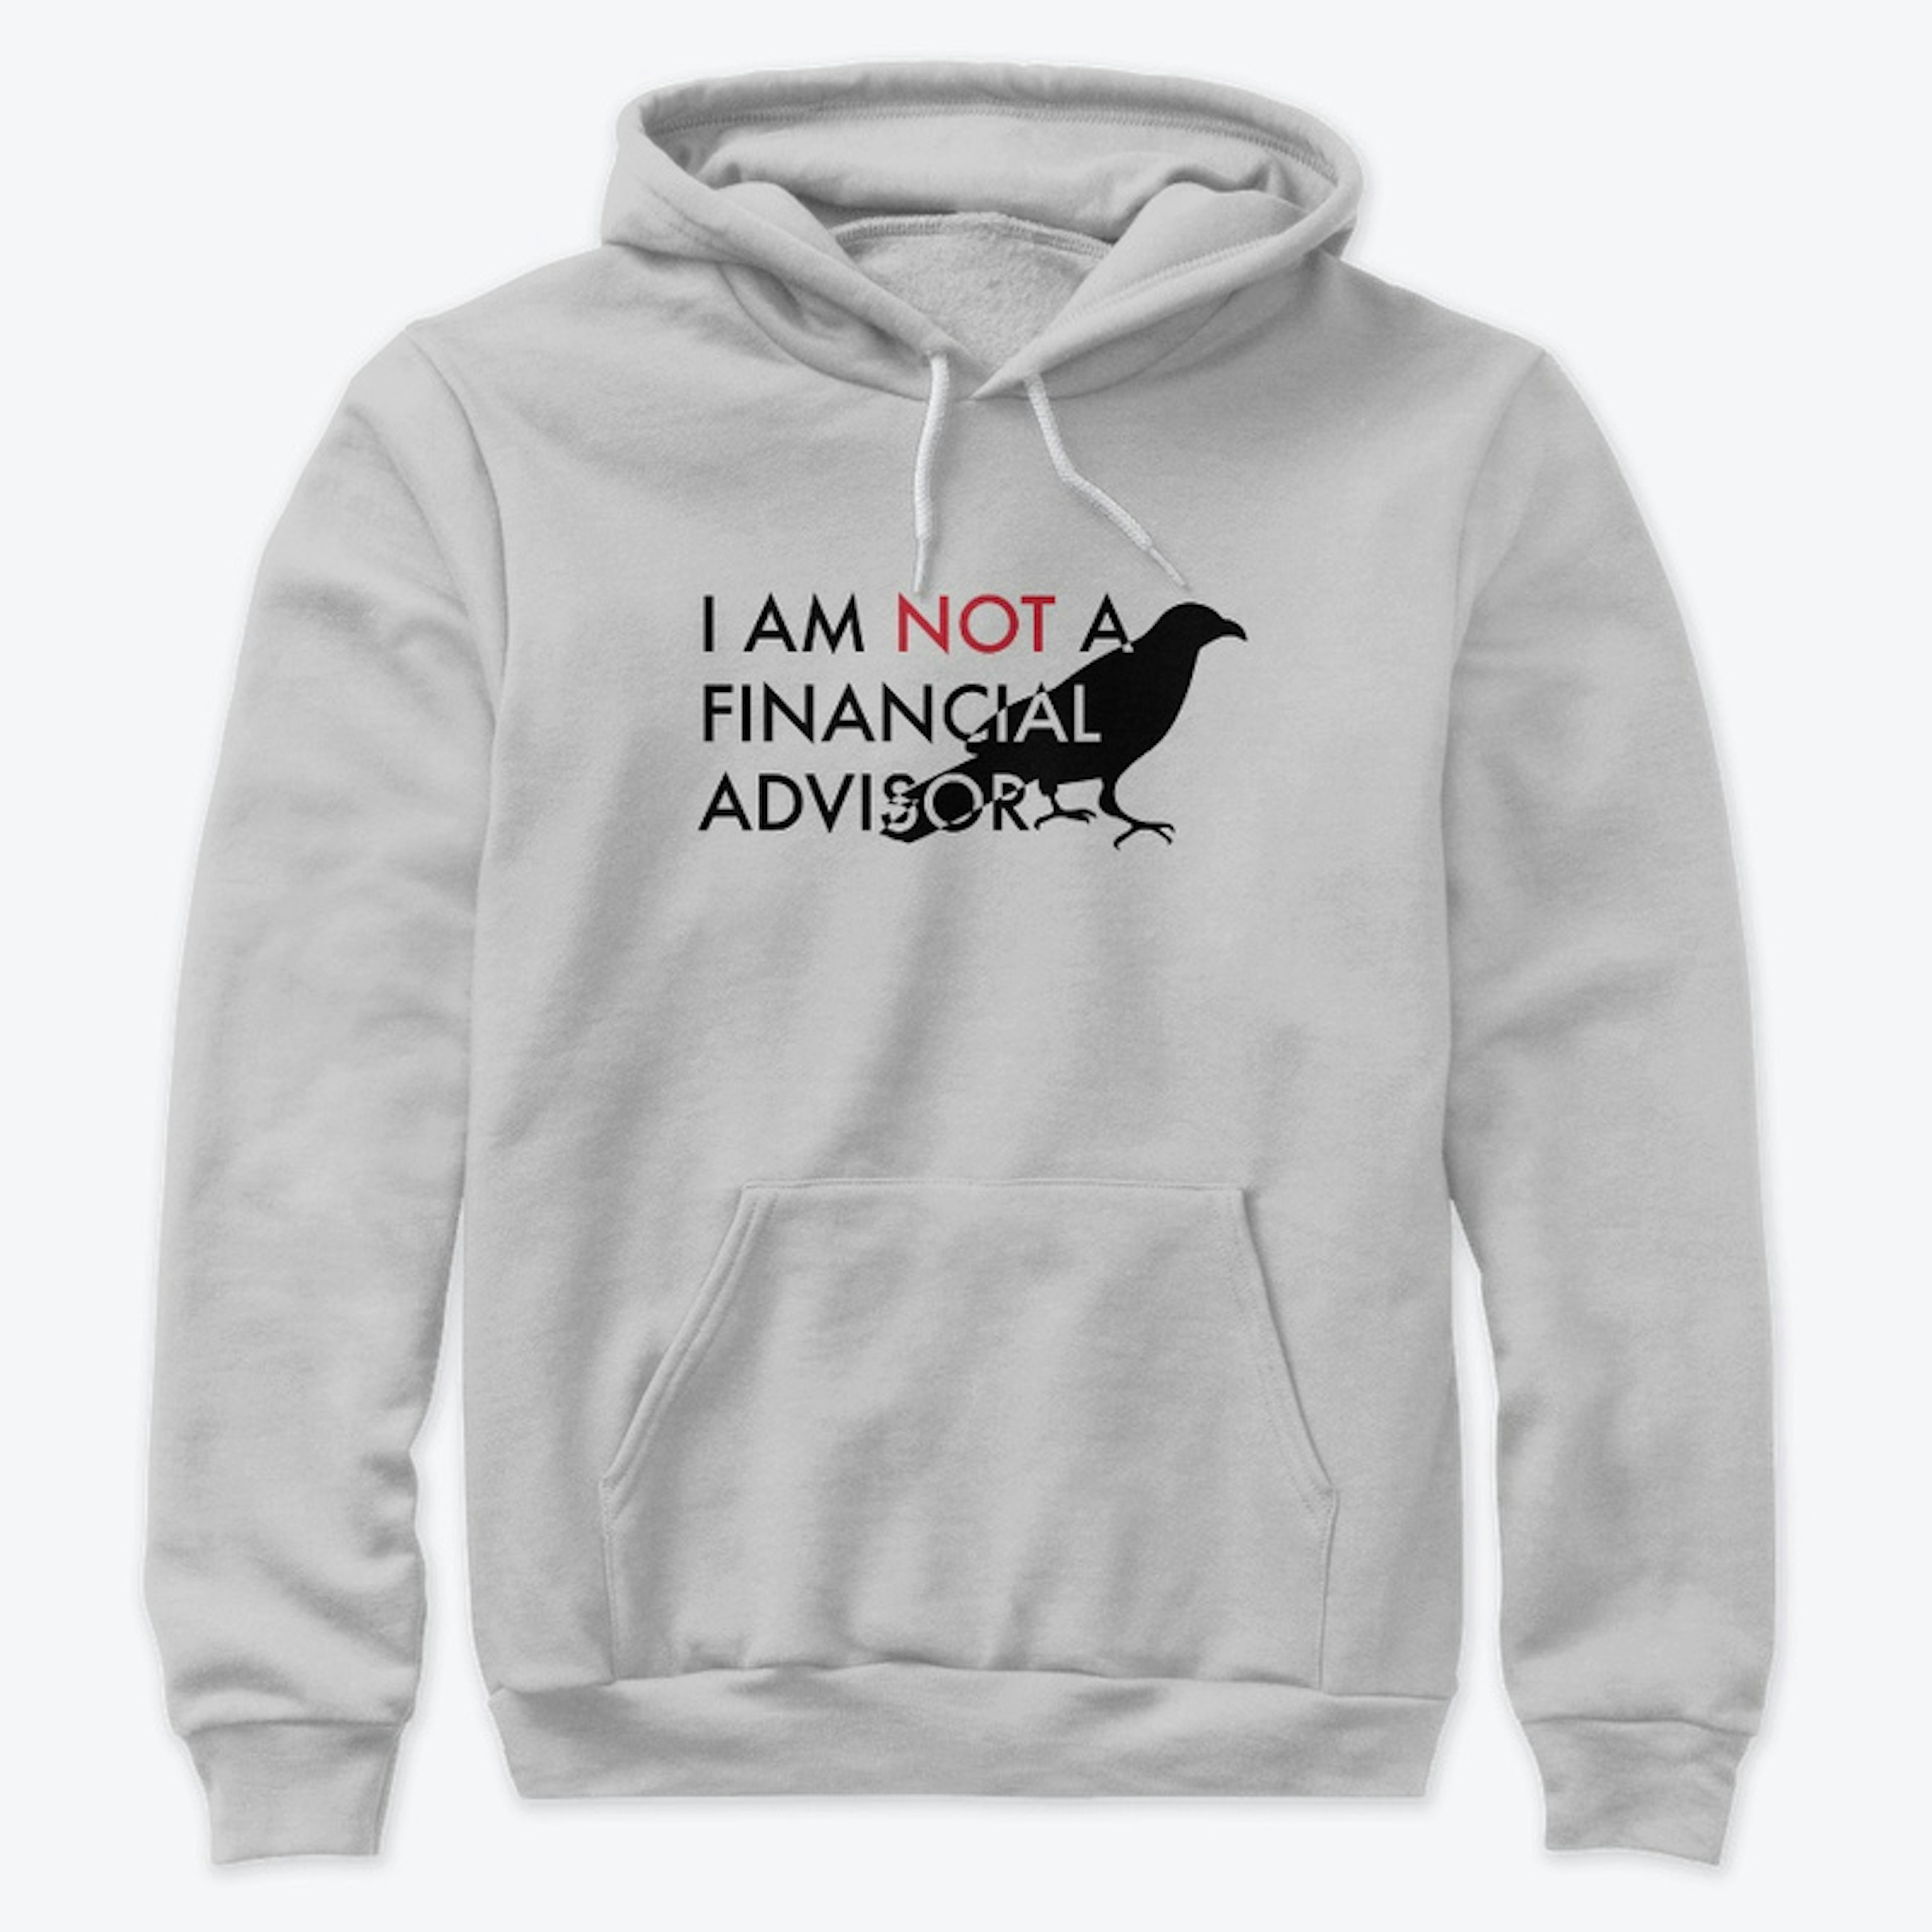 The I AM NOT Hoodie